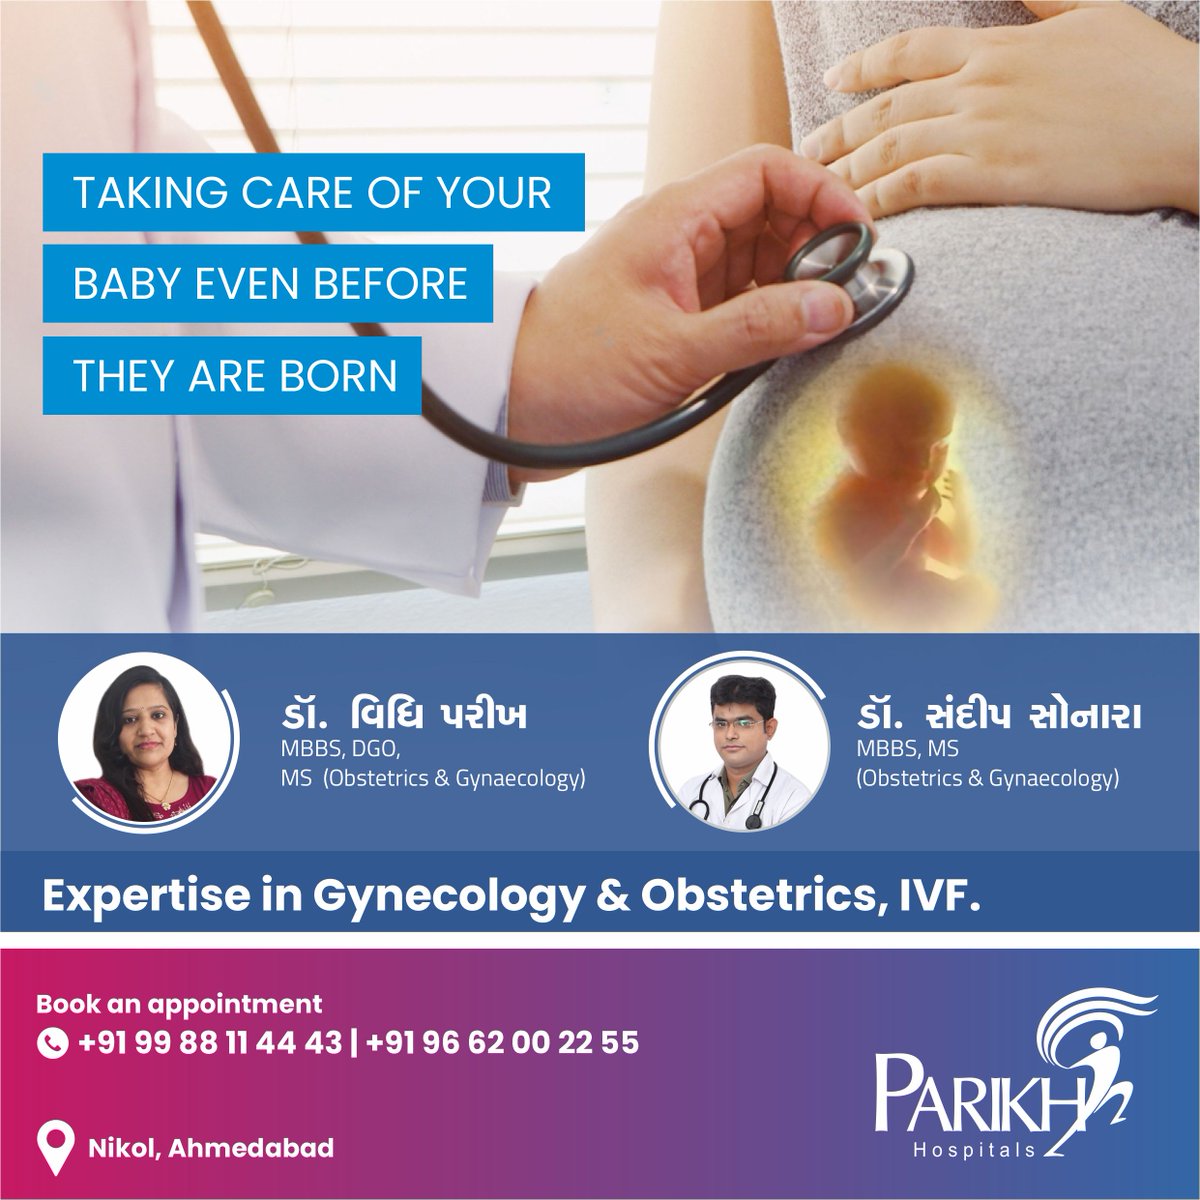 Parikh Hospitals, Nikol provides individualized care to high & low risk pregnant women offered by our multidisciplinary team of Consultants,who are available to support our patients throughout their pregnancy journey #ParikhHospital #ivf #pregnancy #pregnant #babycare #delivery